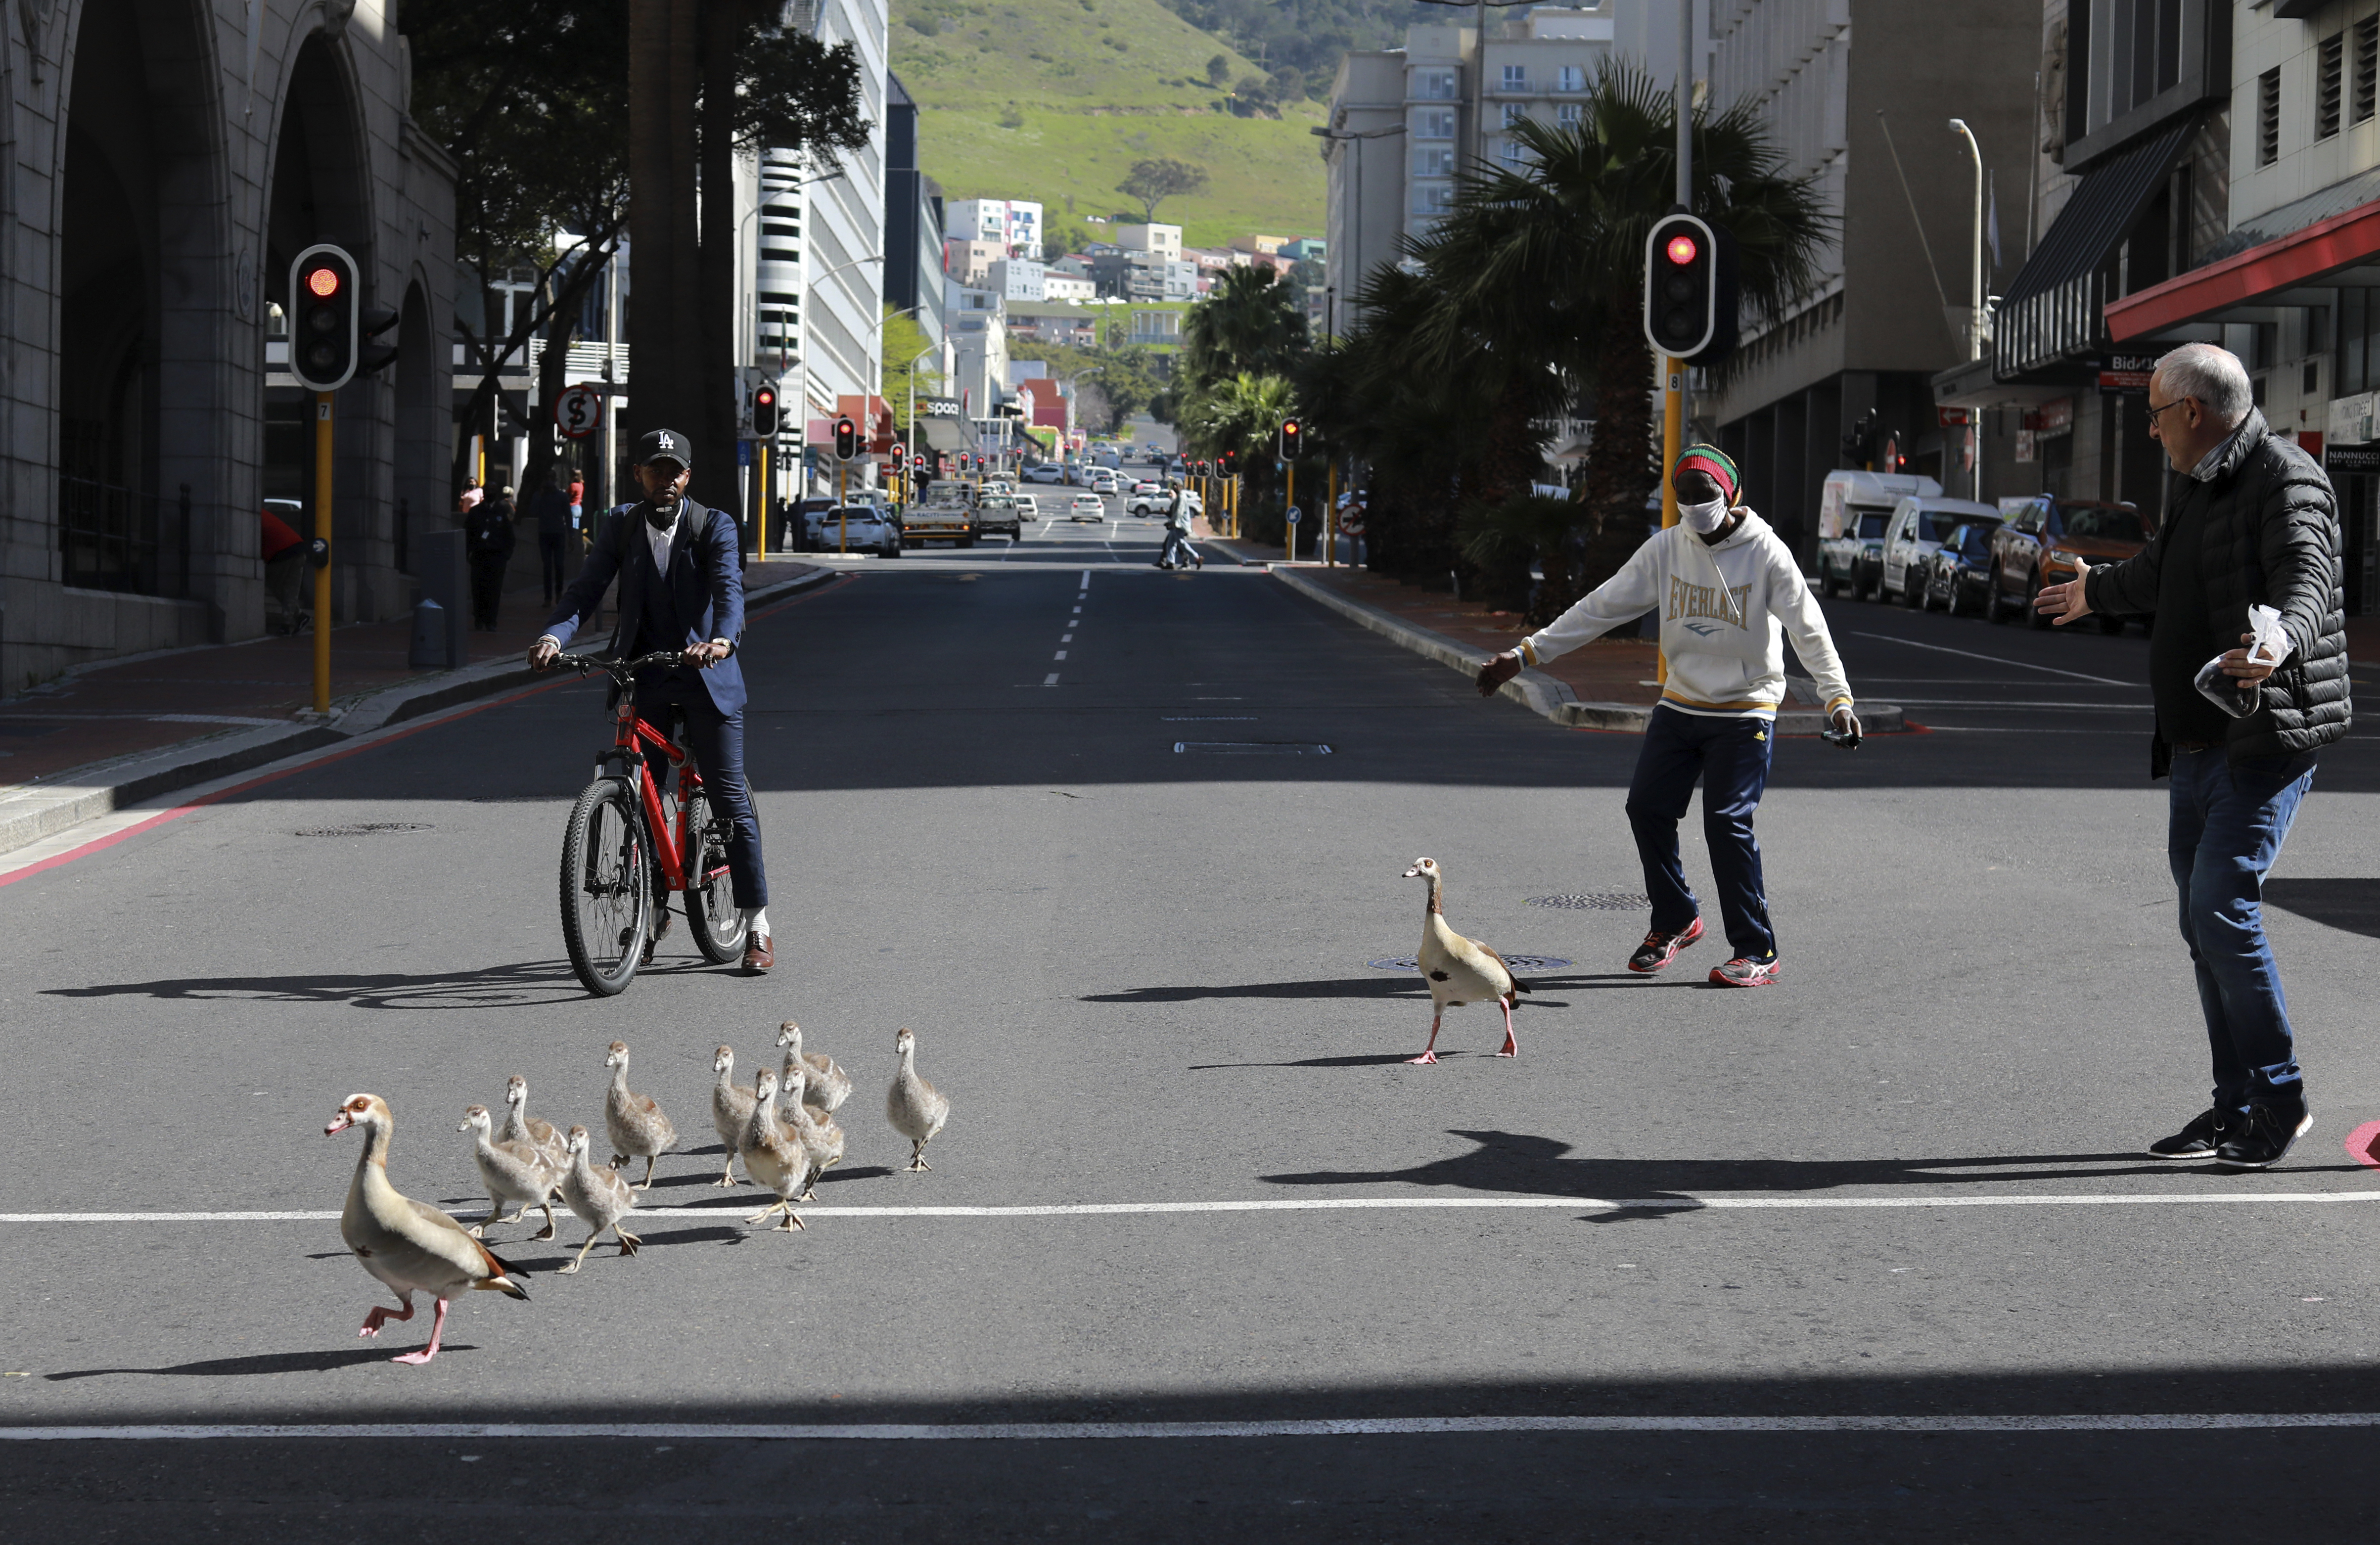 Egyptian geese are guided safely across a busy street in Cape Town, South Africa Monday Sept. 7, 2020. (AP Photo/Nardus Engelbrecht)